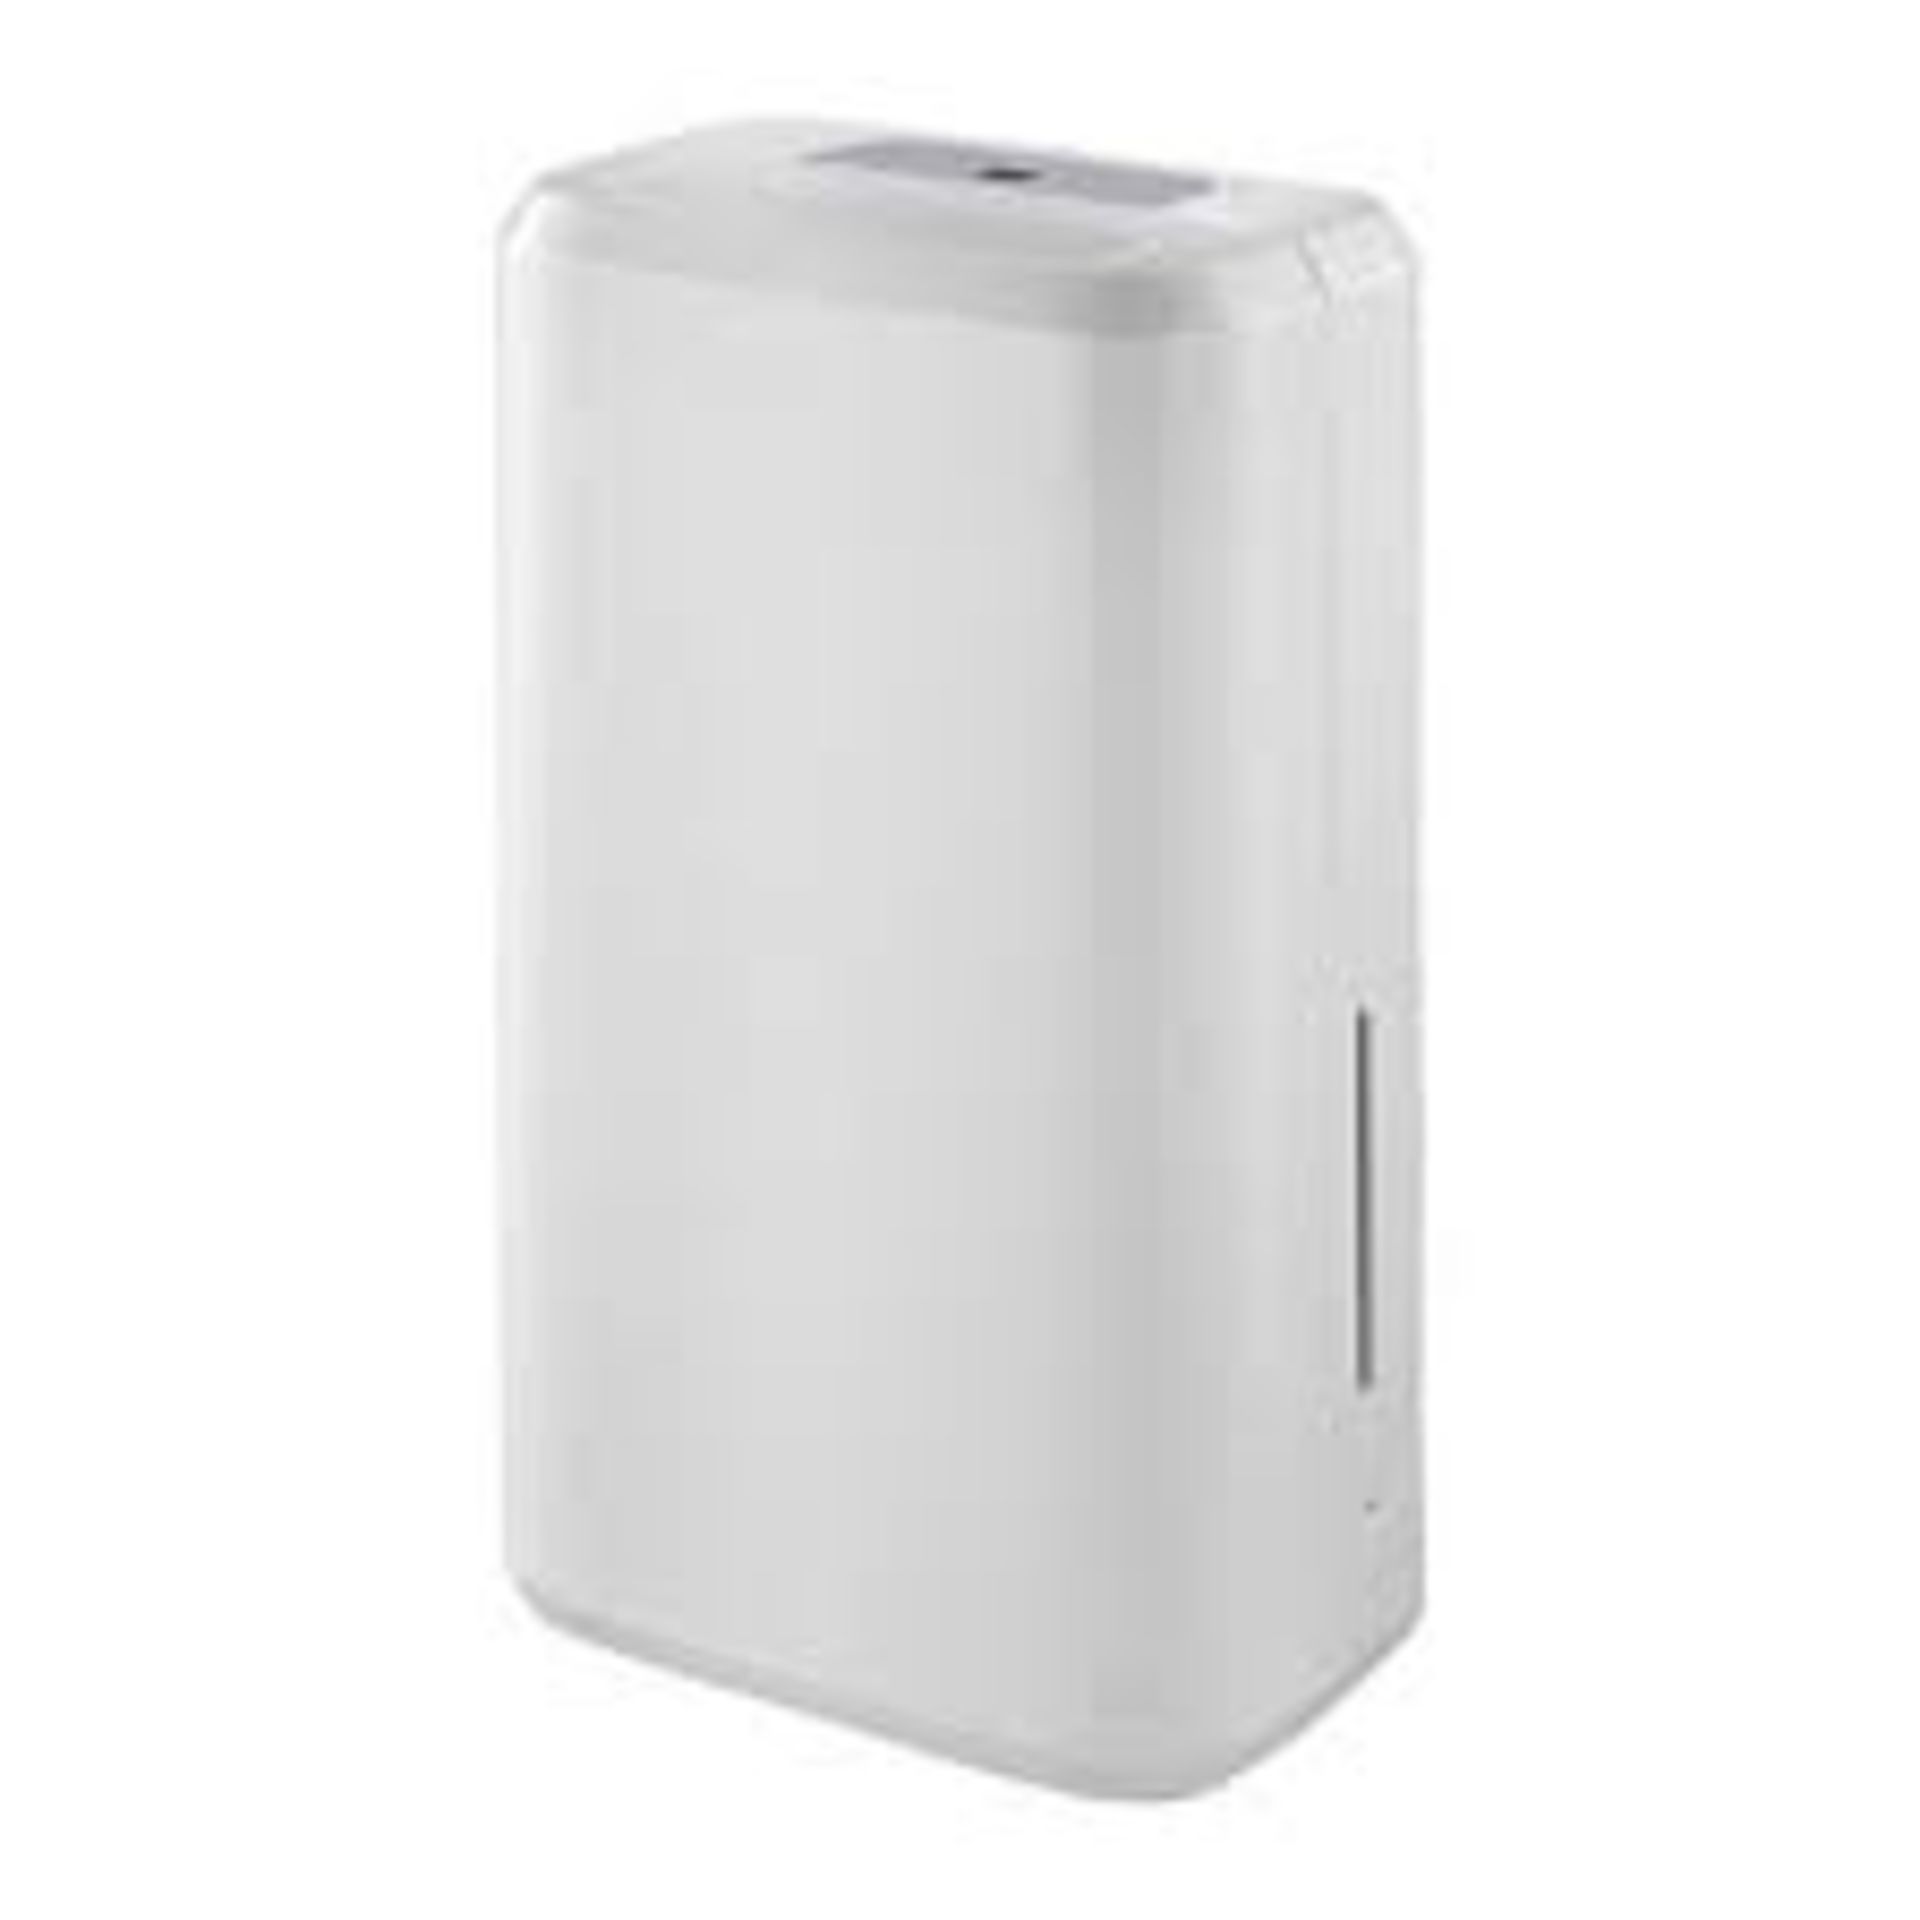 10L Dehumidifier D002A. - SR4. This dehumidifier is ideal for removing excess moisture and